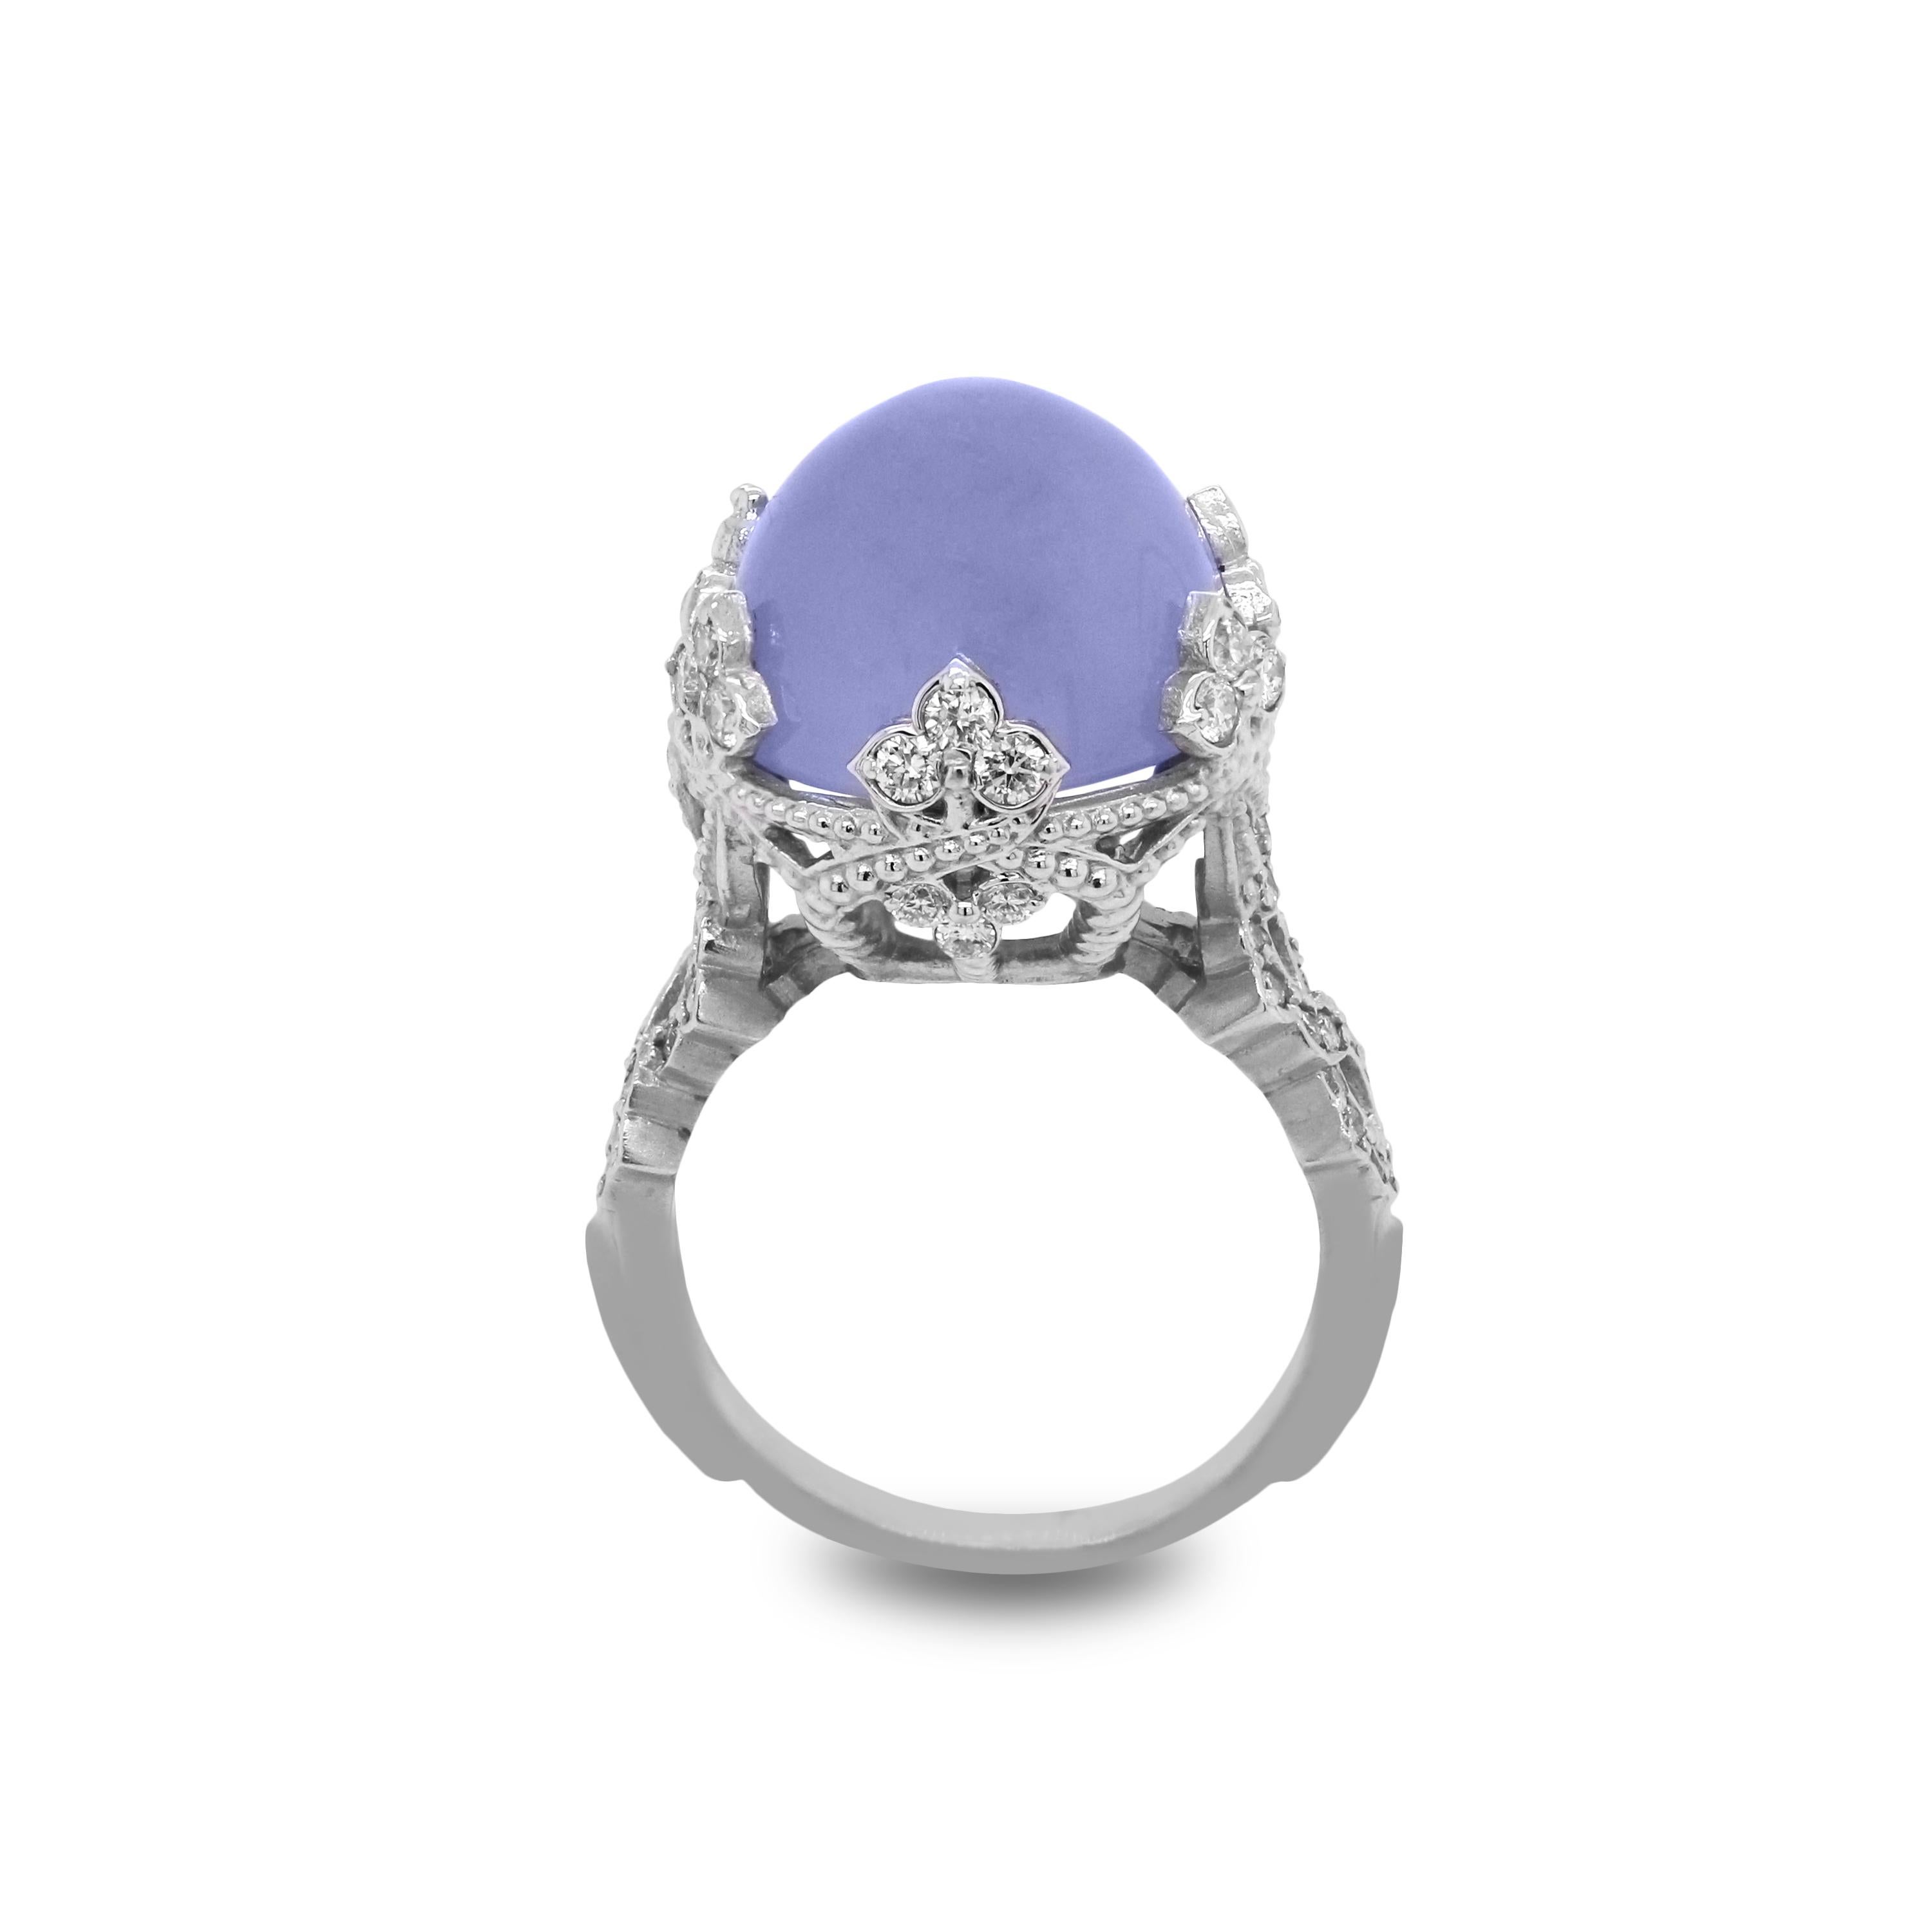 18K White Gold and Diamond Ring with Blue Chalcedony center by Stambolian

From the Stambolian 